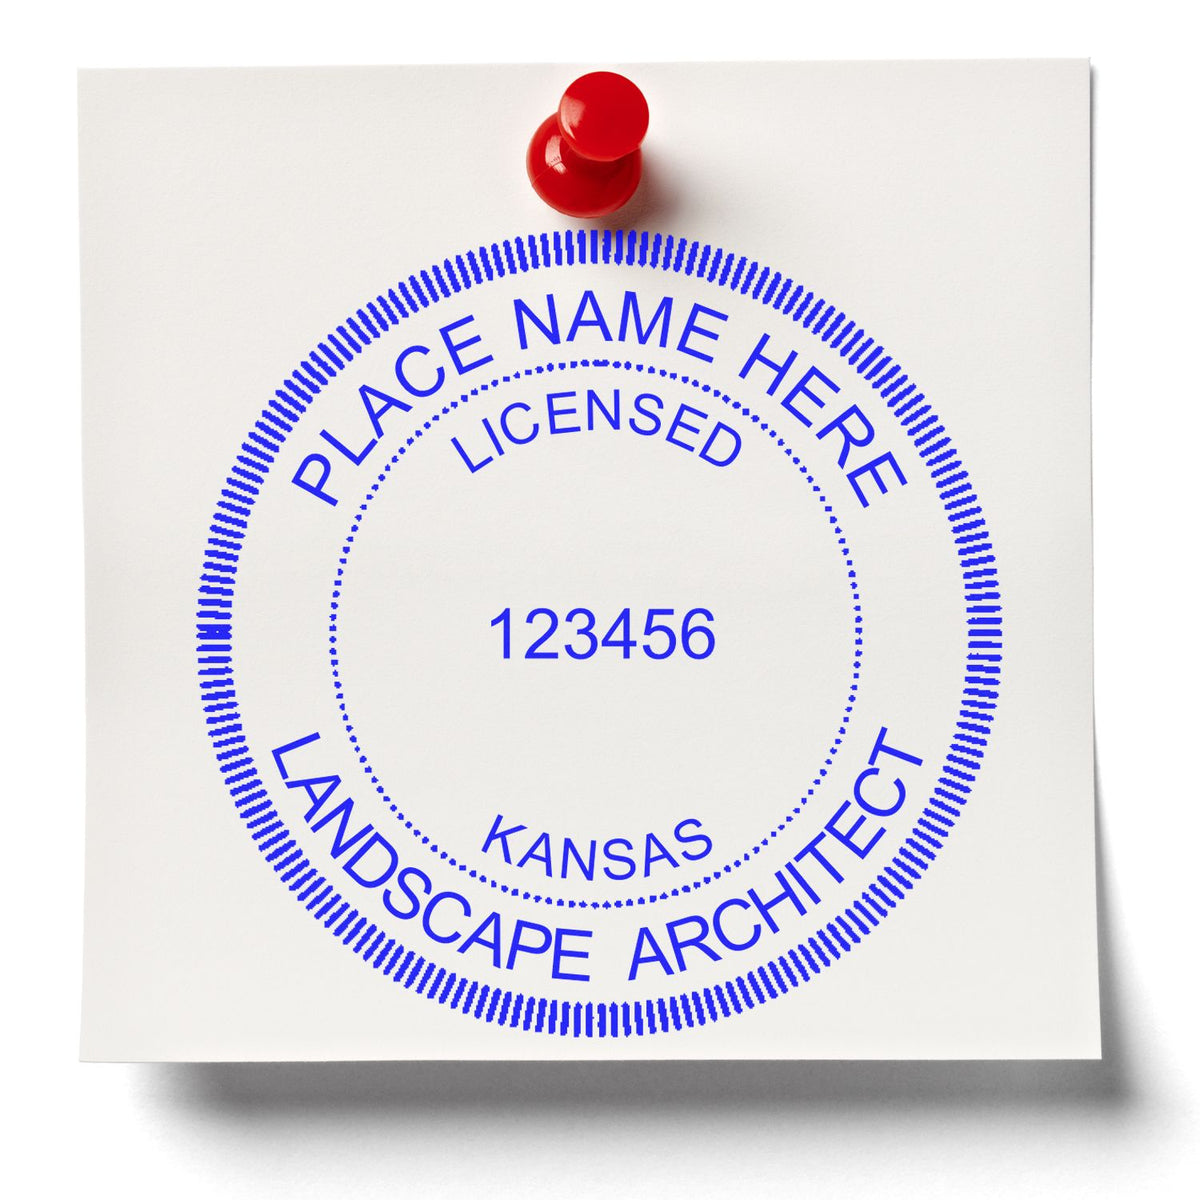 The Slim Pre-Inked Kansas Landscape Architect Seal Stamp stamp impression comes to life with a crisp, detailed photo on paper - showcasing true professional quality.